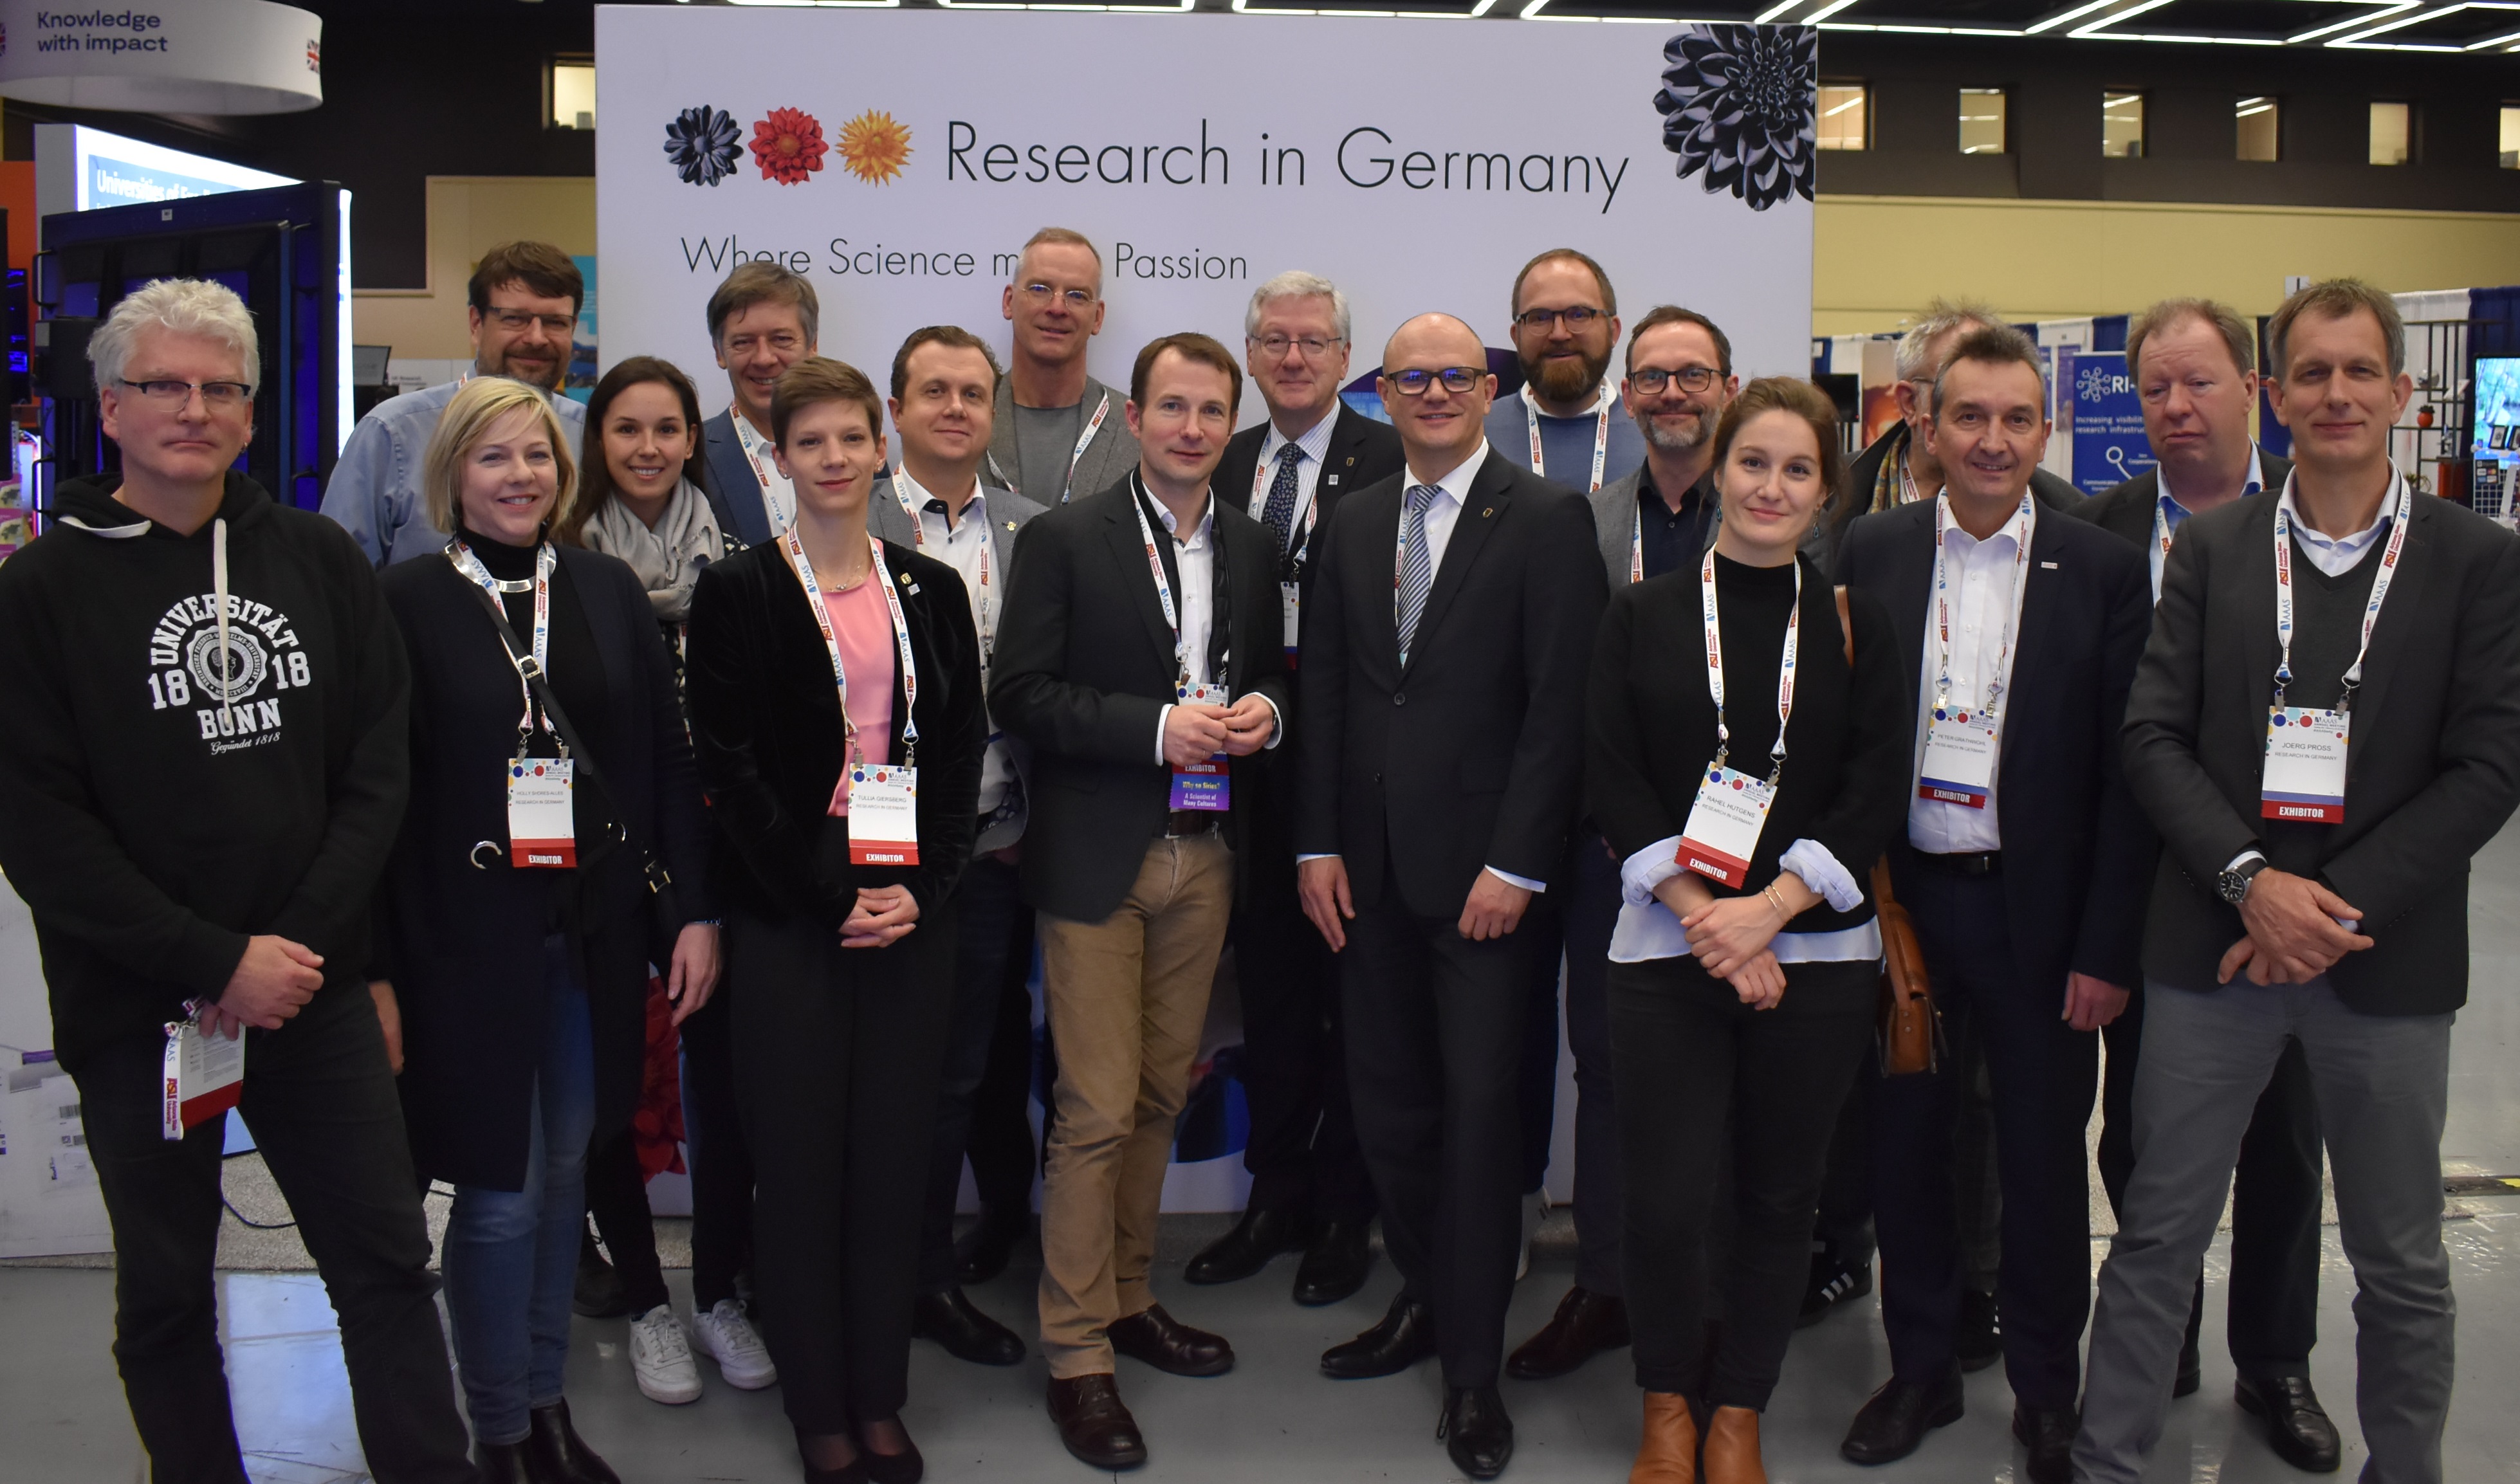 DFG and Research in Germany at the AAAS meeting